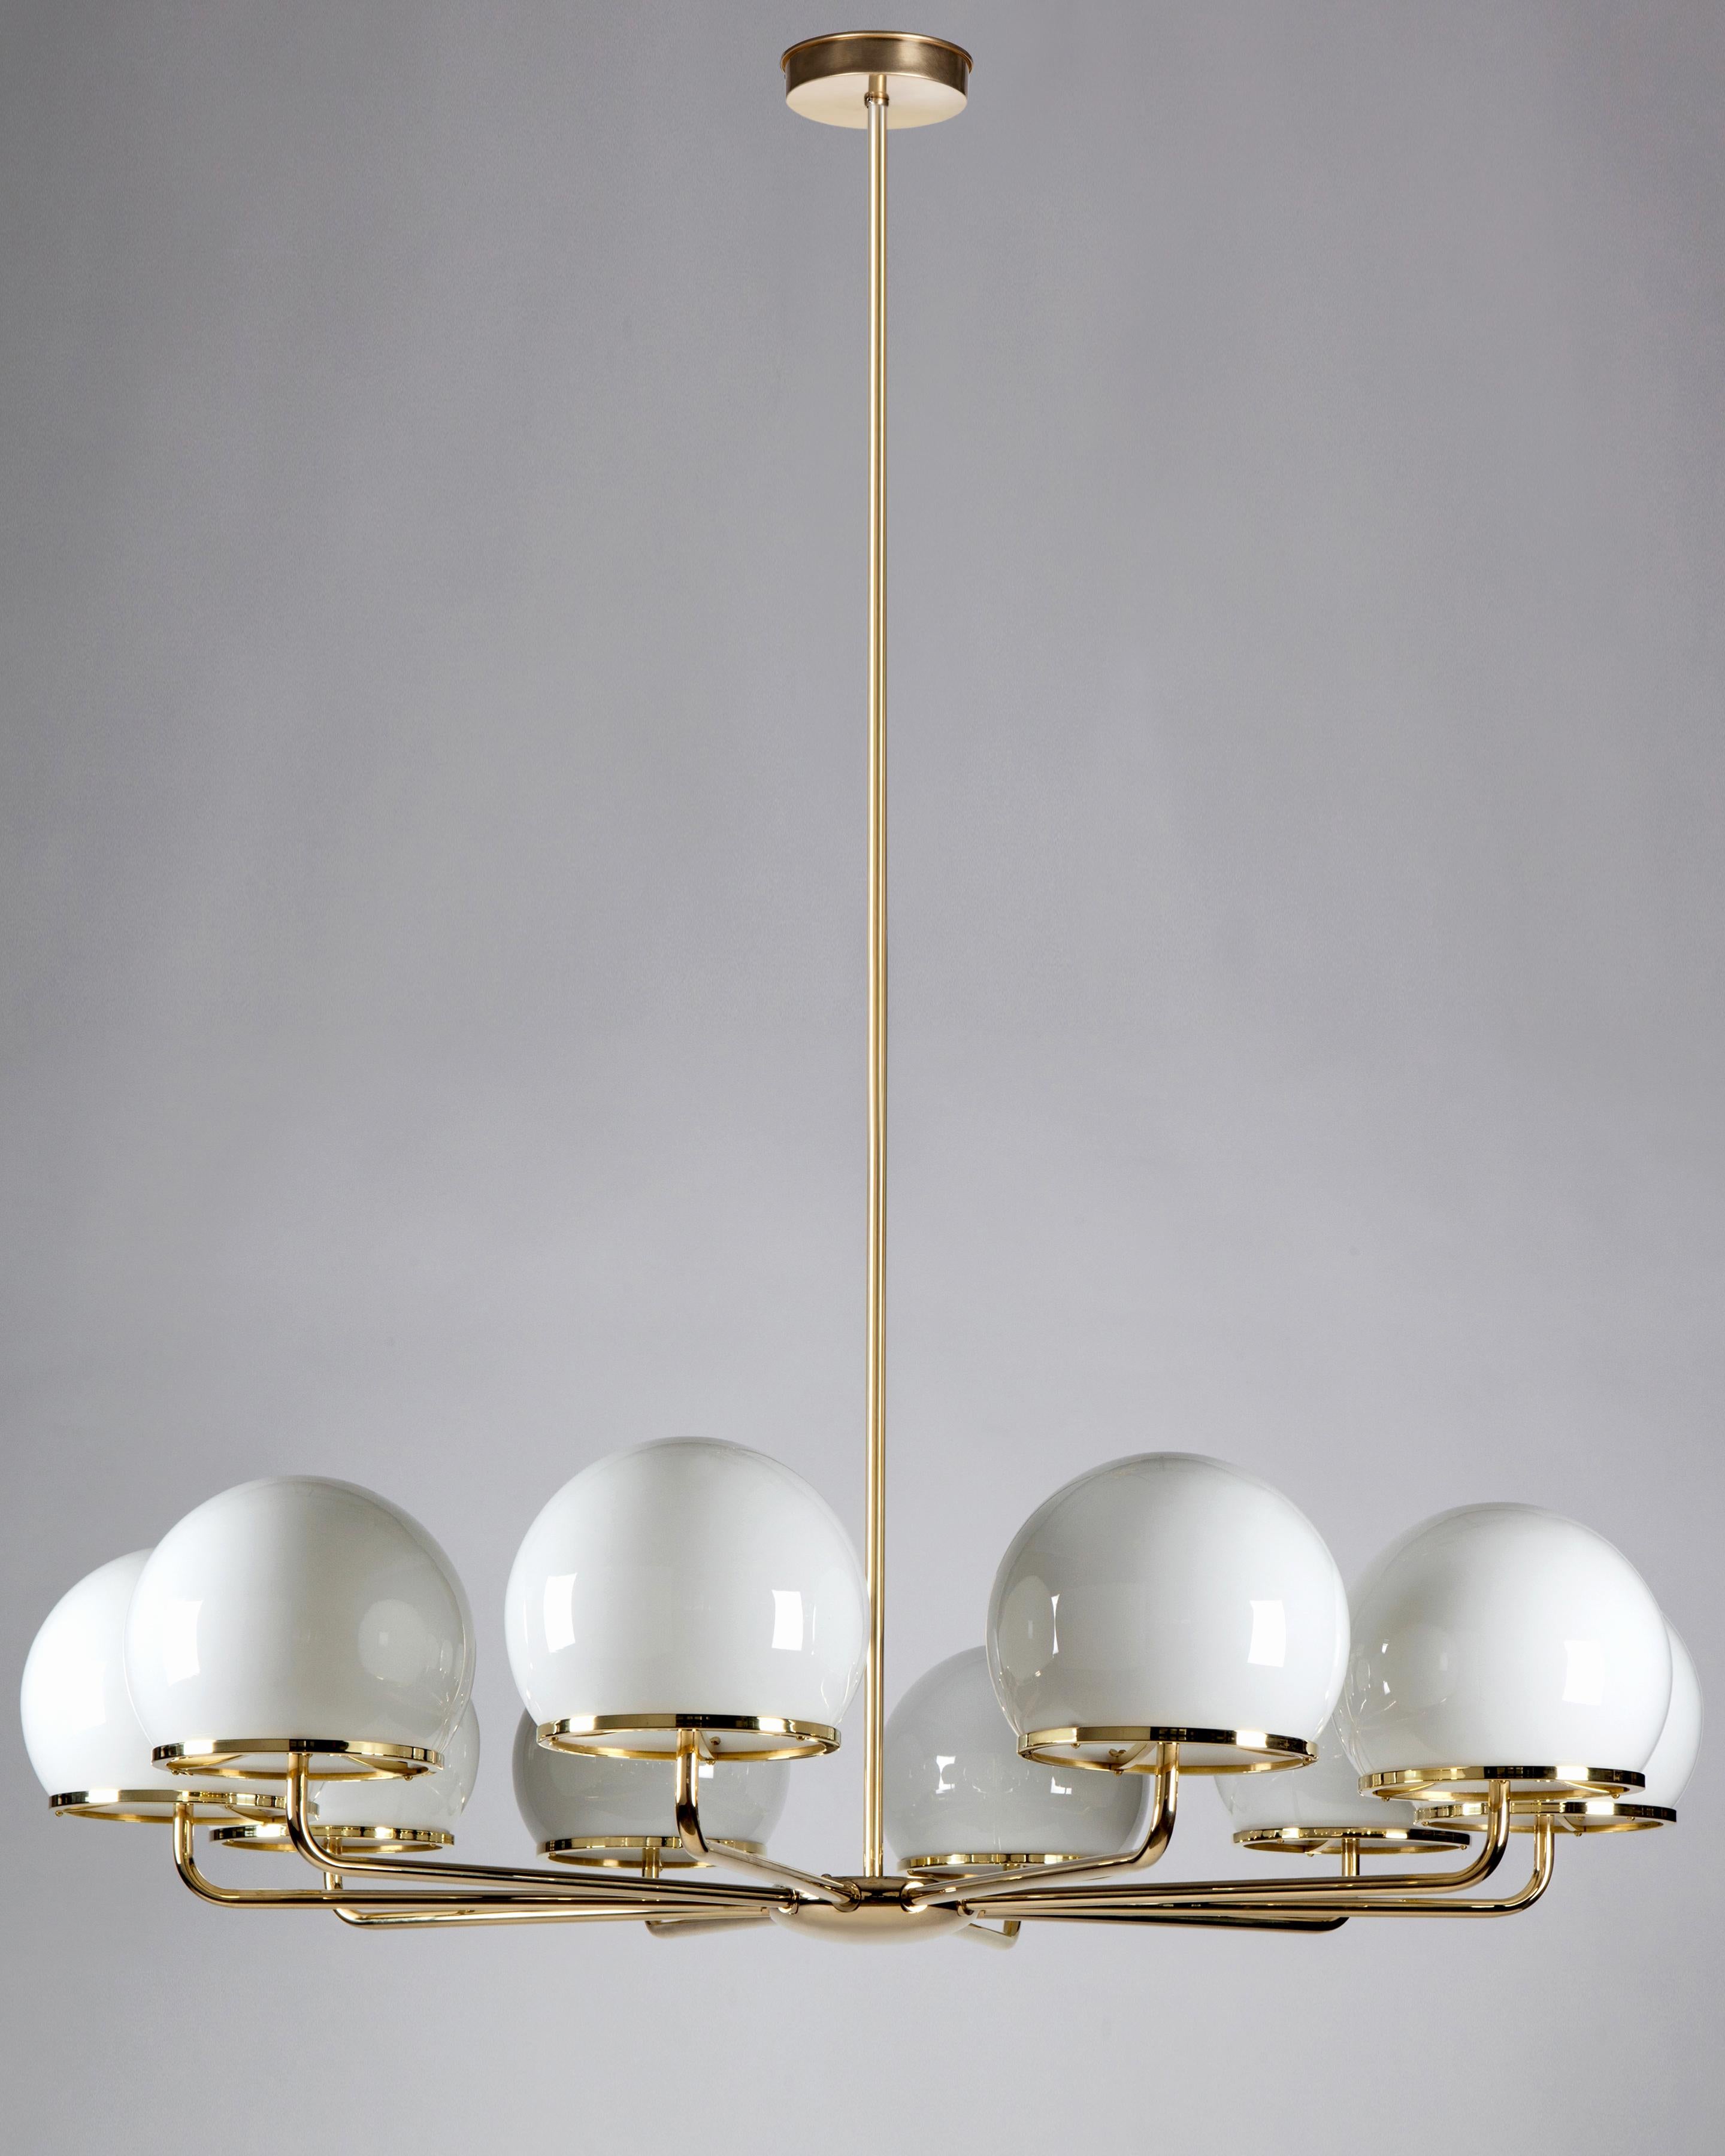 WHL2223.10
The Ingersoll round chandelier by Remains Lighting is a ten arm ceiling fixture with a simple yet elegant form. Refined proportions and exceptional construction describe the rounded cluster and curved arms of the frame, machined from